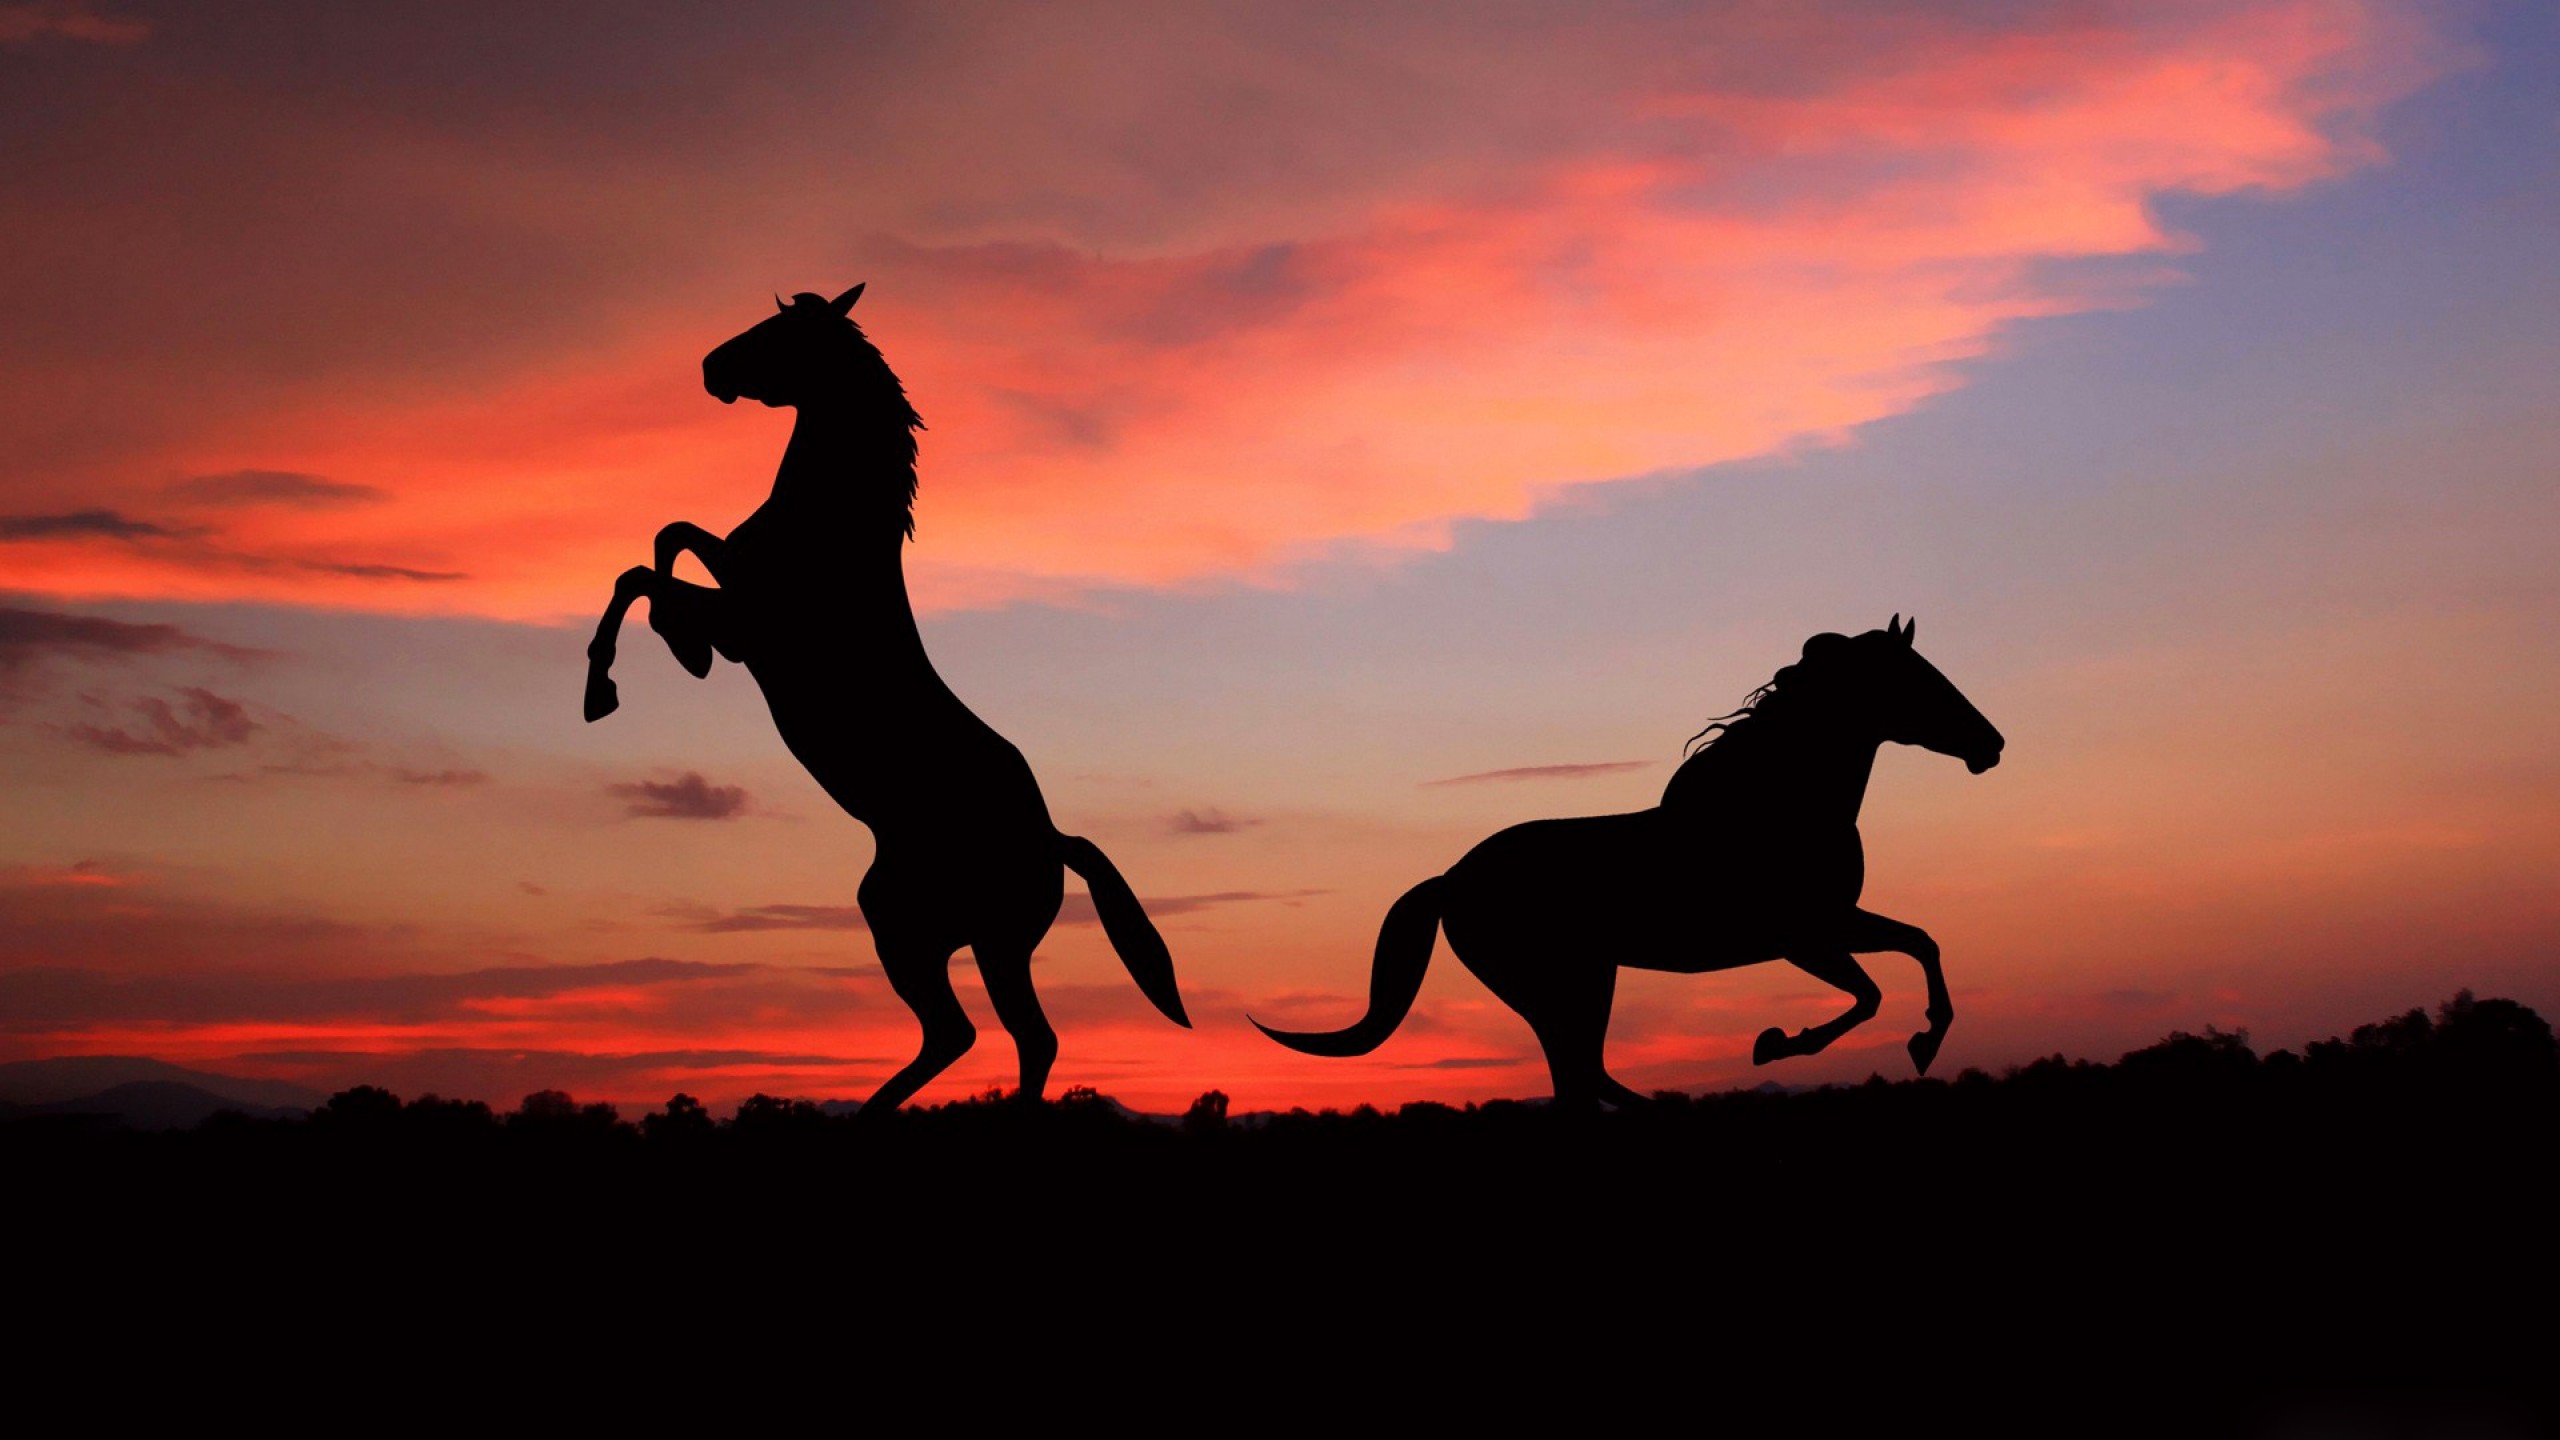 2560x1440 Horse Sunset Wallpaper Picture For Desktop Wallpaper 2560 x 1440 px 1.08 MB  sunset chesnut iphone